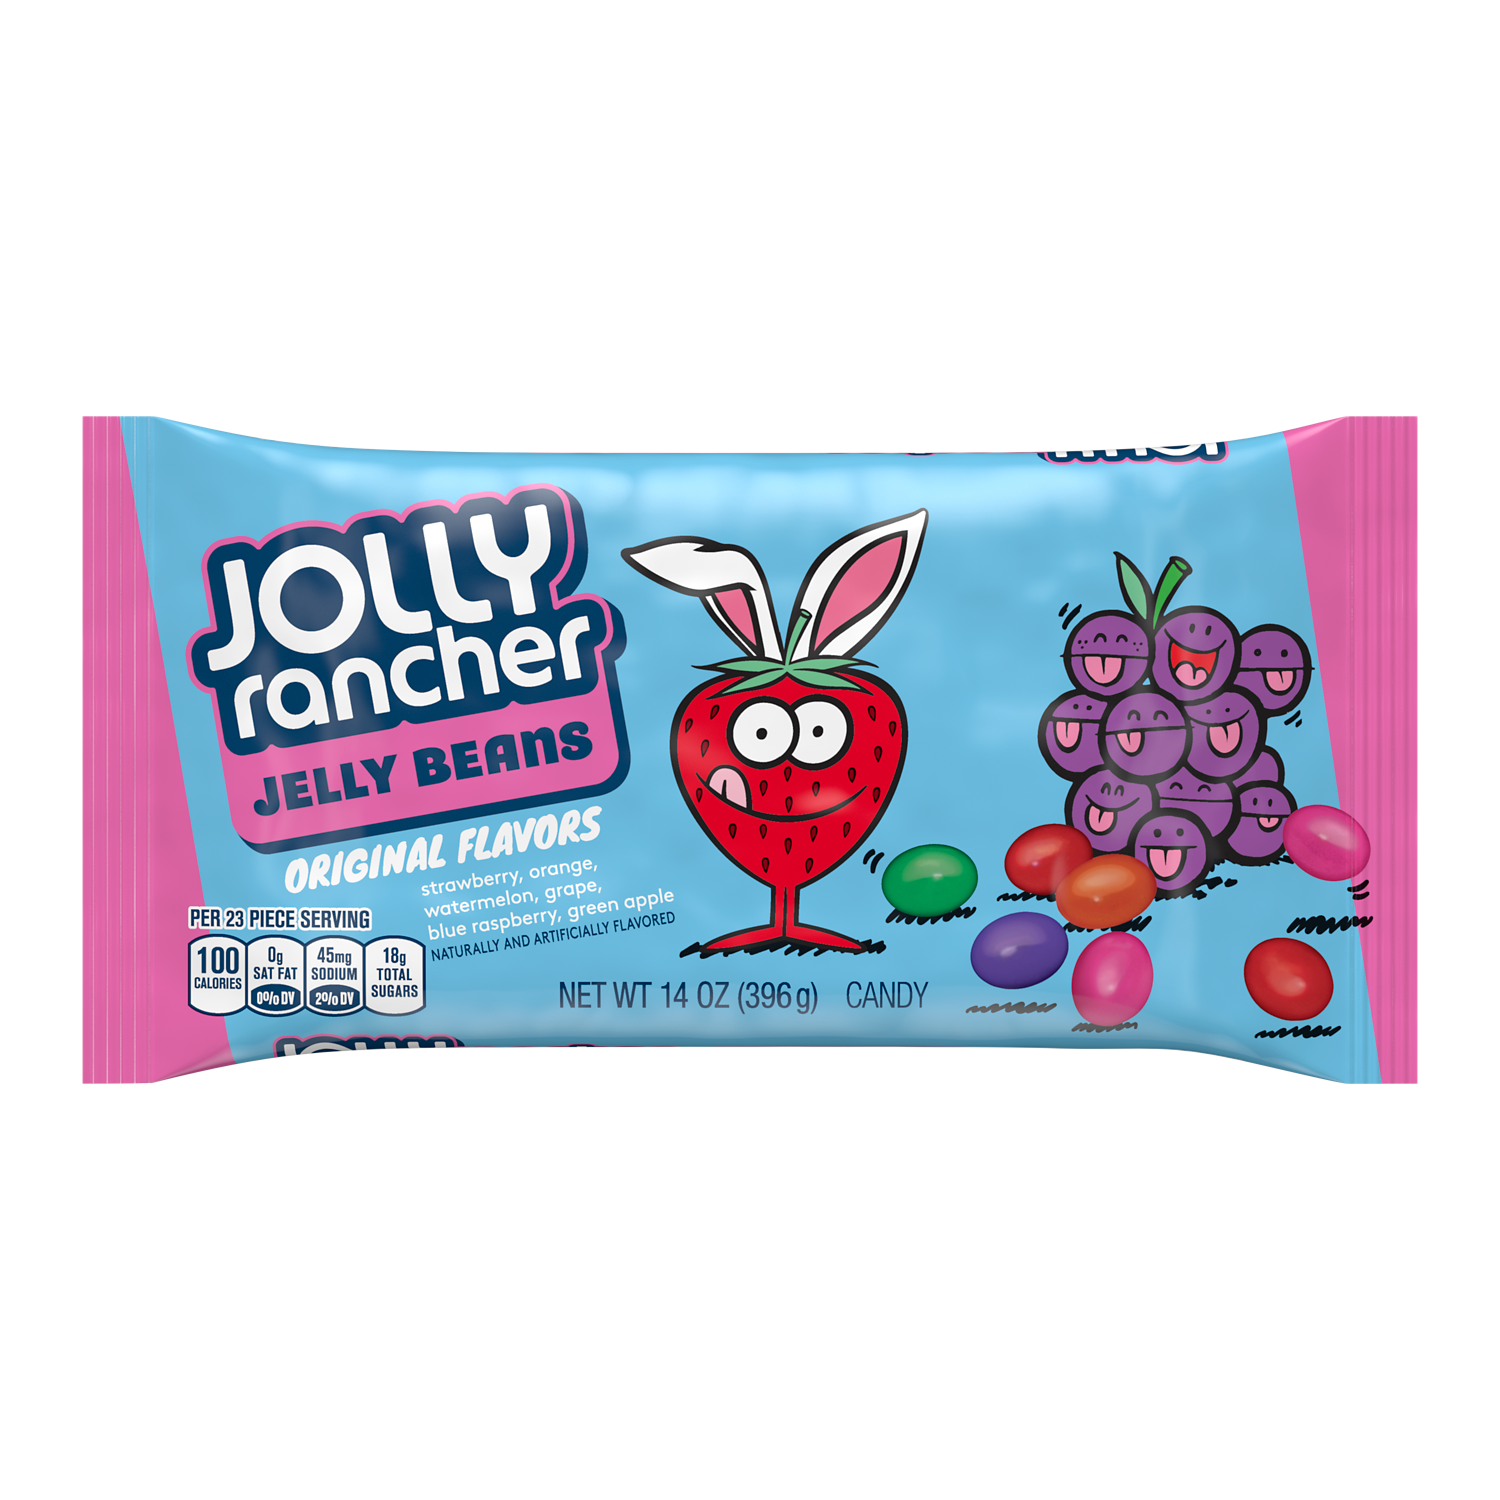 JOLLY RANCHER Original Flavors Jelly Beans, 14 oz bag - Front of Package